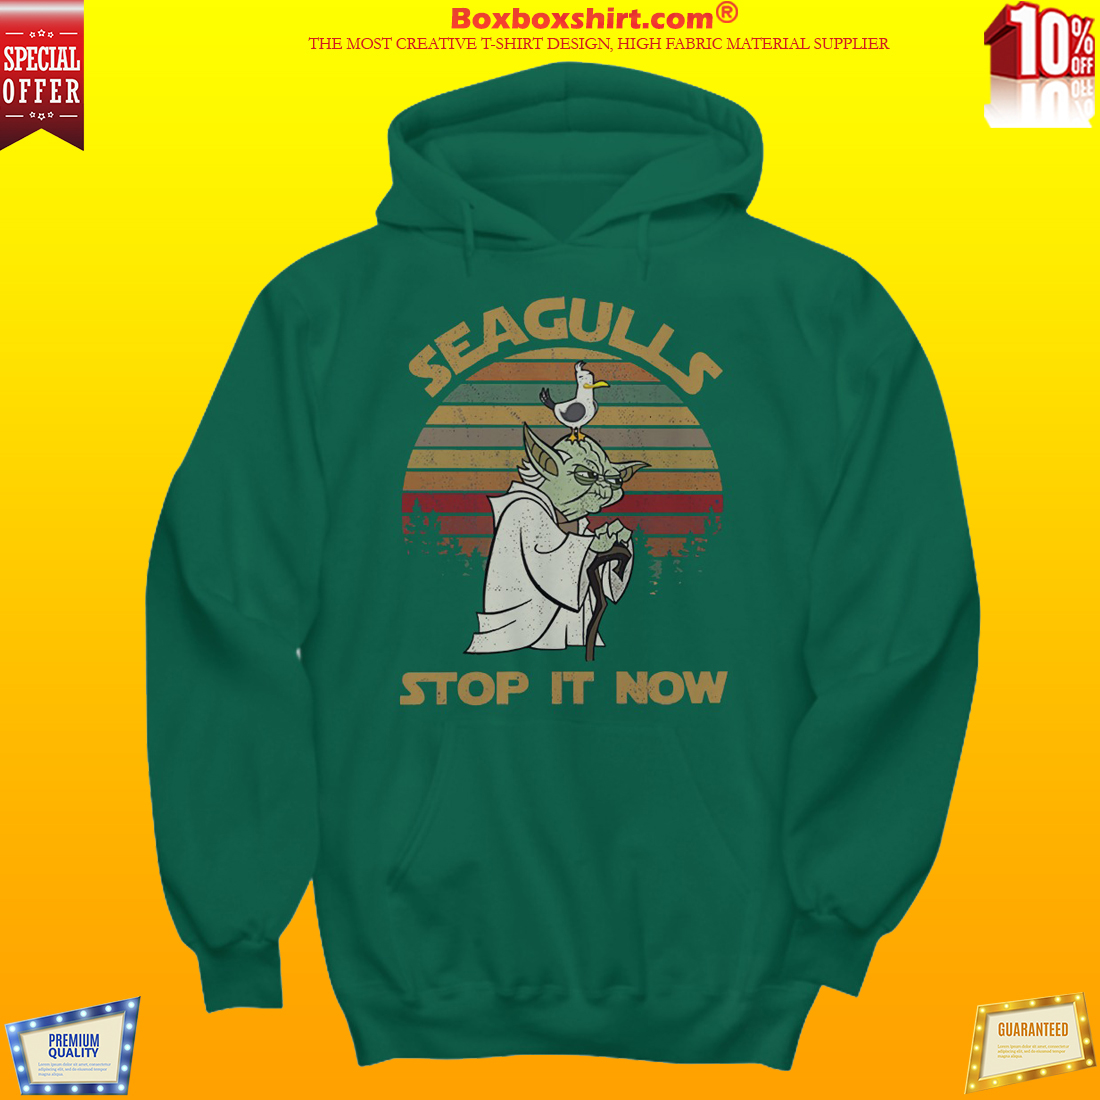 Seagulls stop it now shirt and hoodies